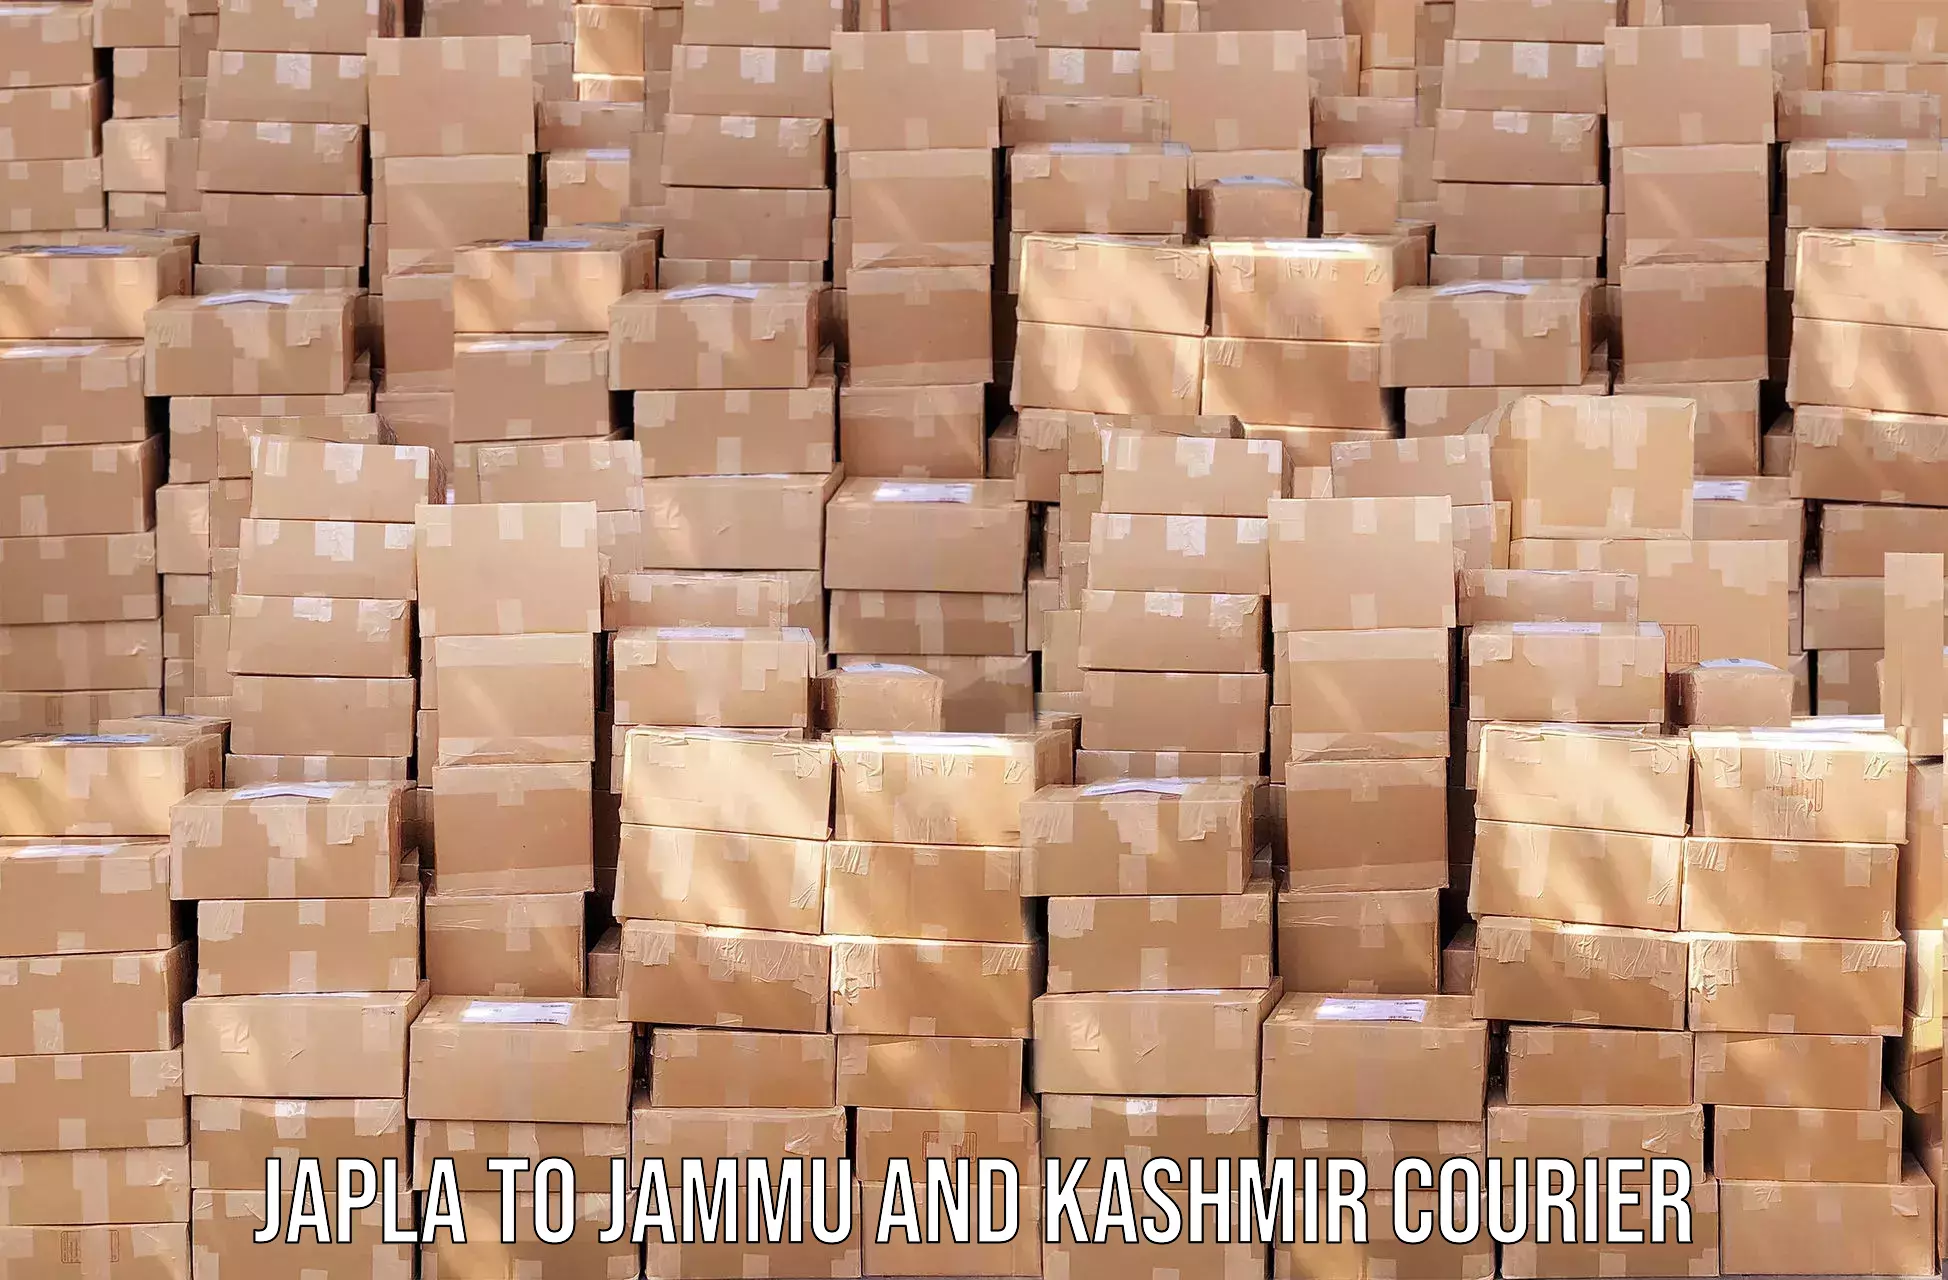 Courier service booking Japla to Jammu and Kashmir